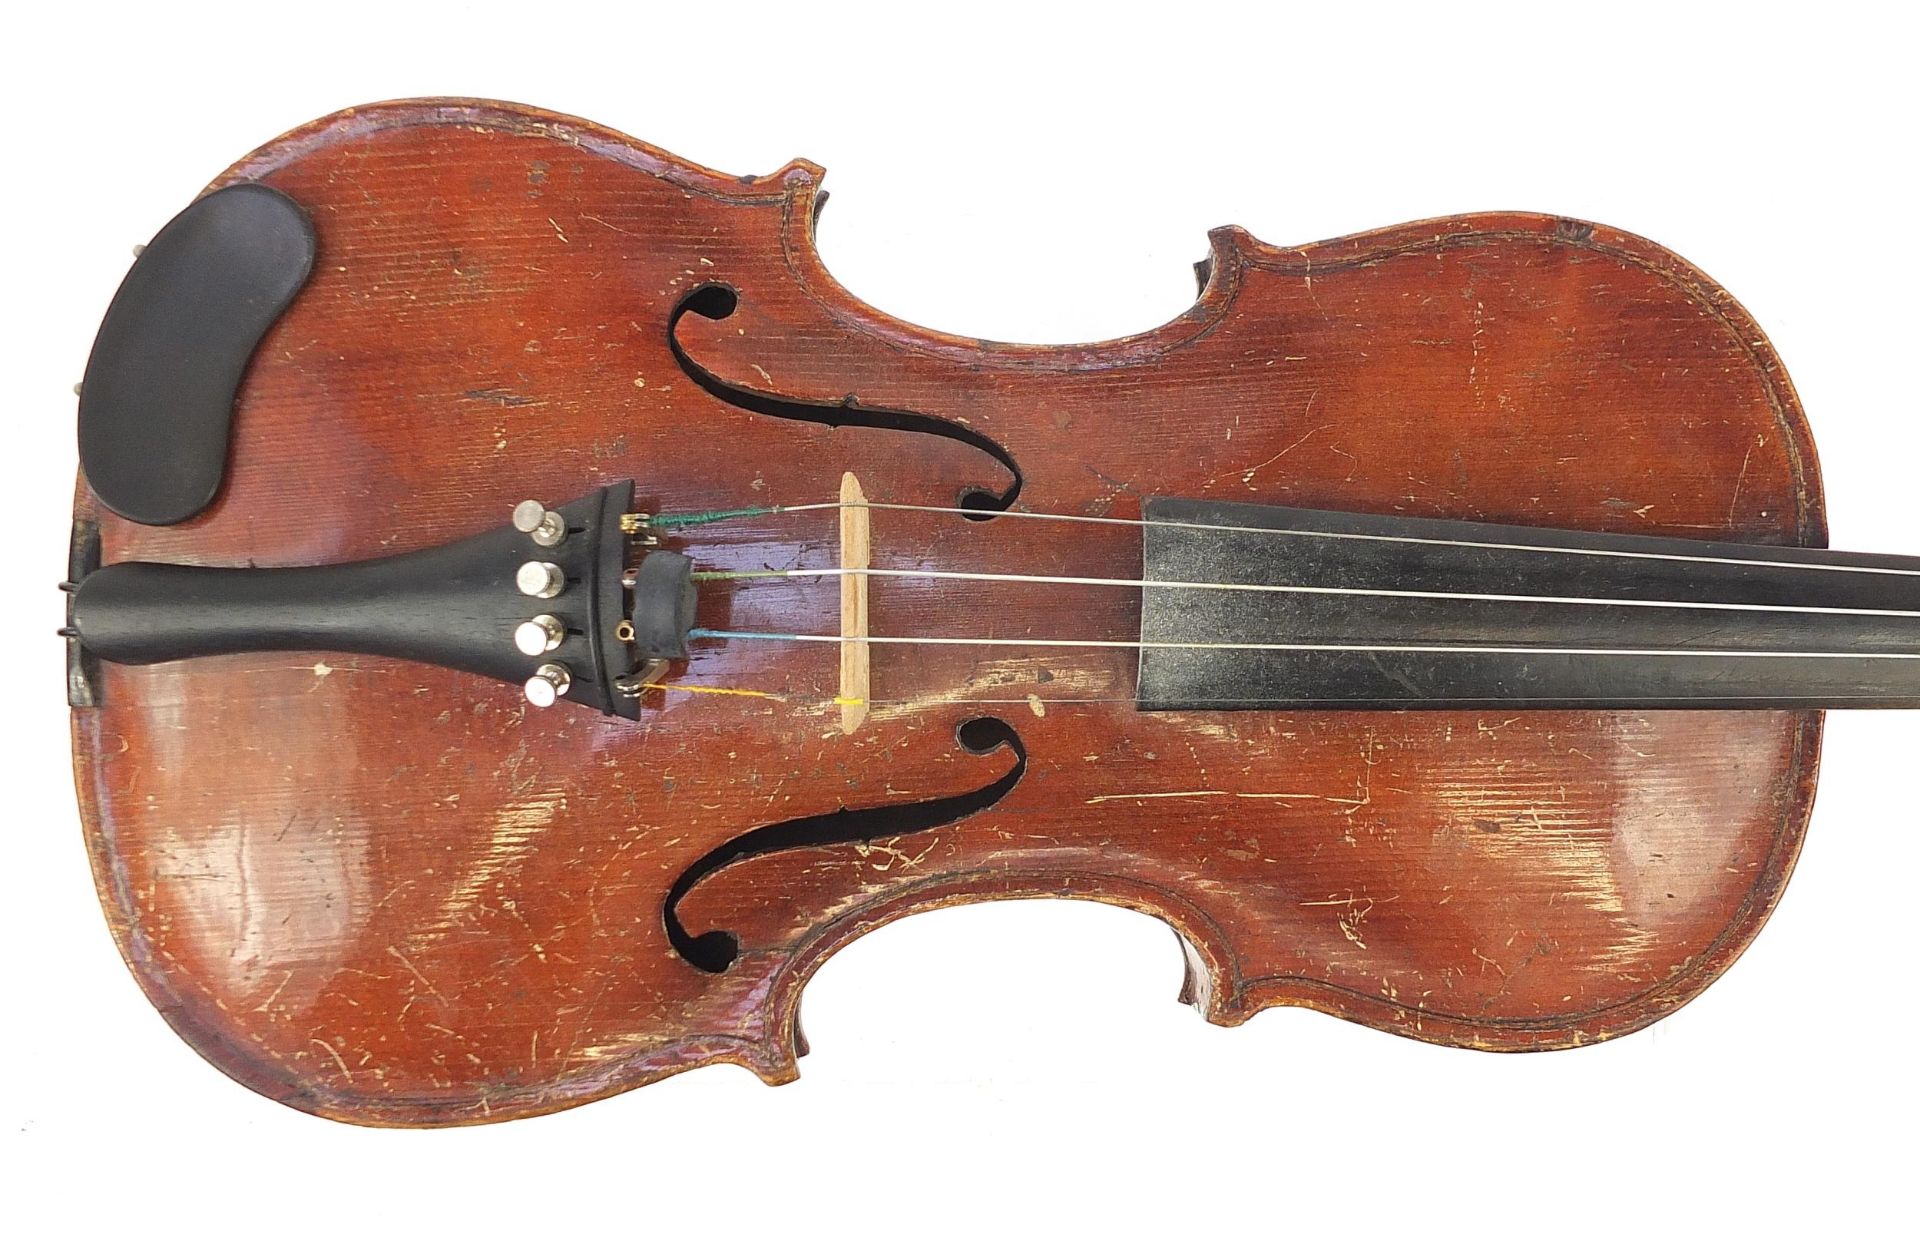 Old wooden violin with two bows and protective case, the violin back 14 inches in length, one violin - Image 2 of 11